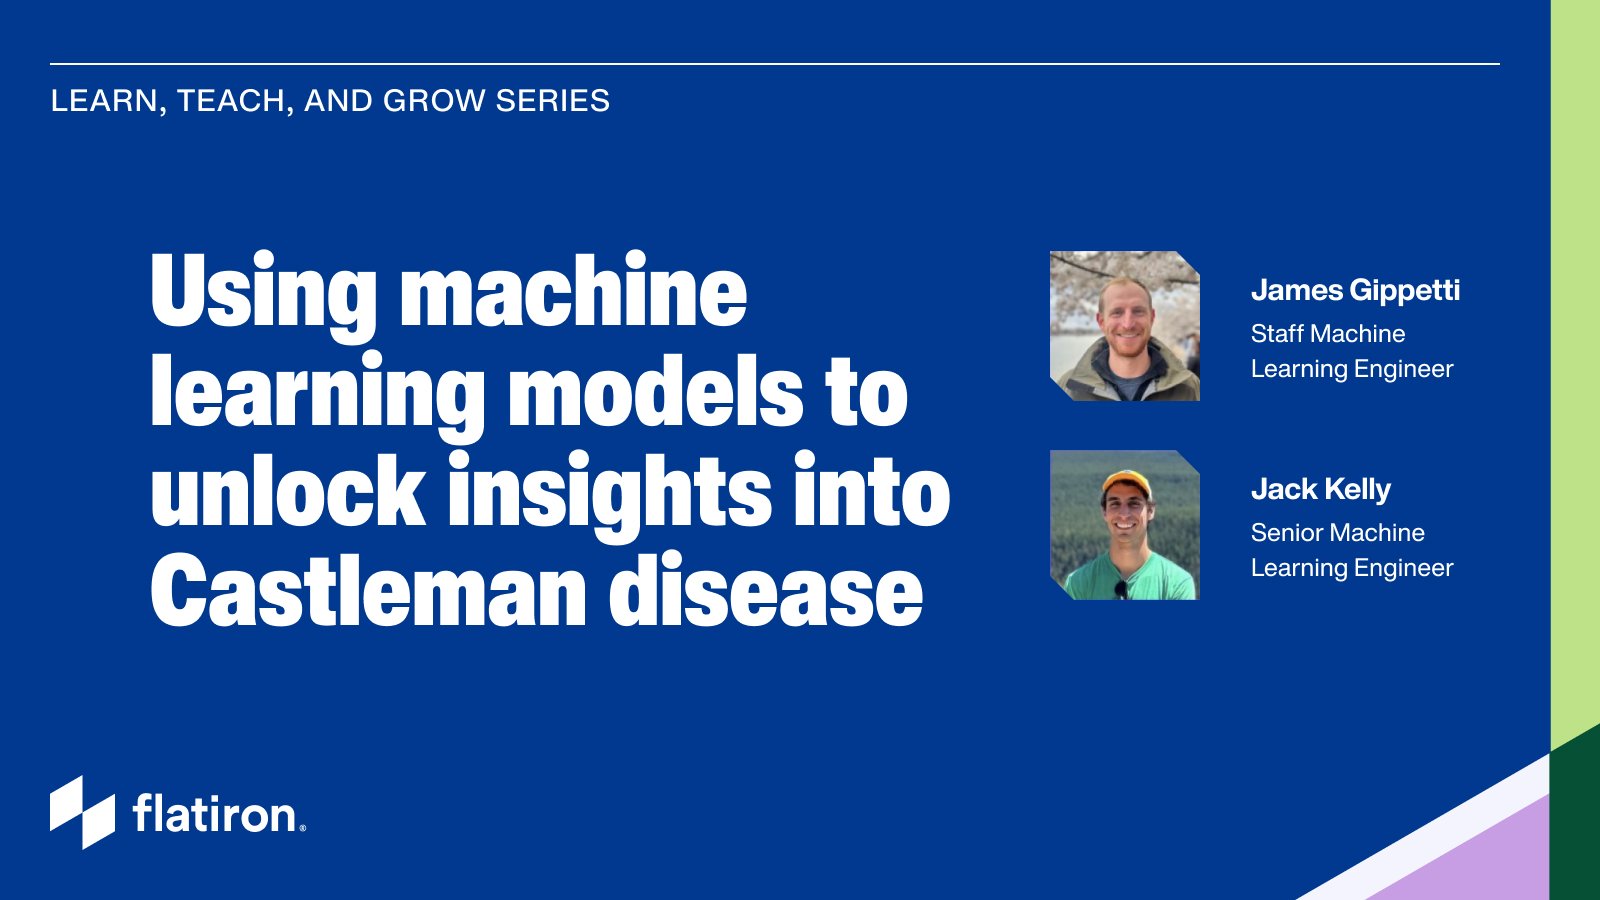 Using machine learning models to unlock insights into Castleman disease